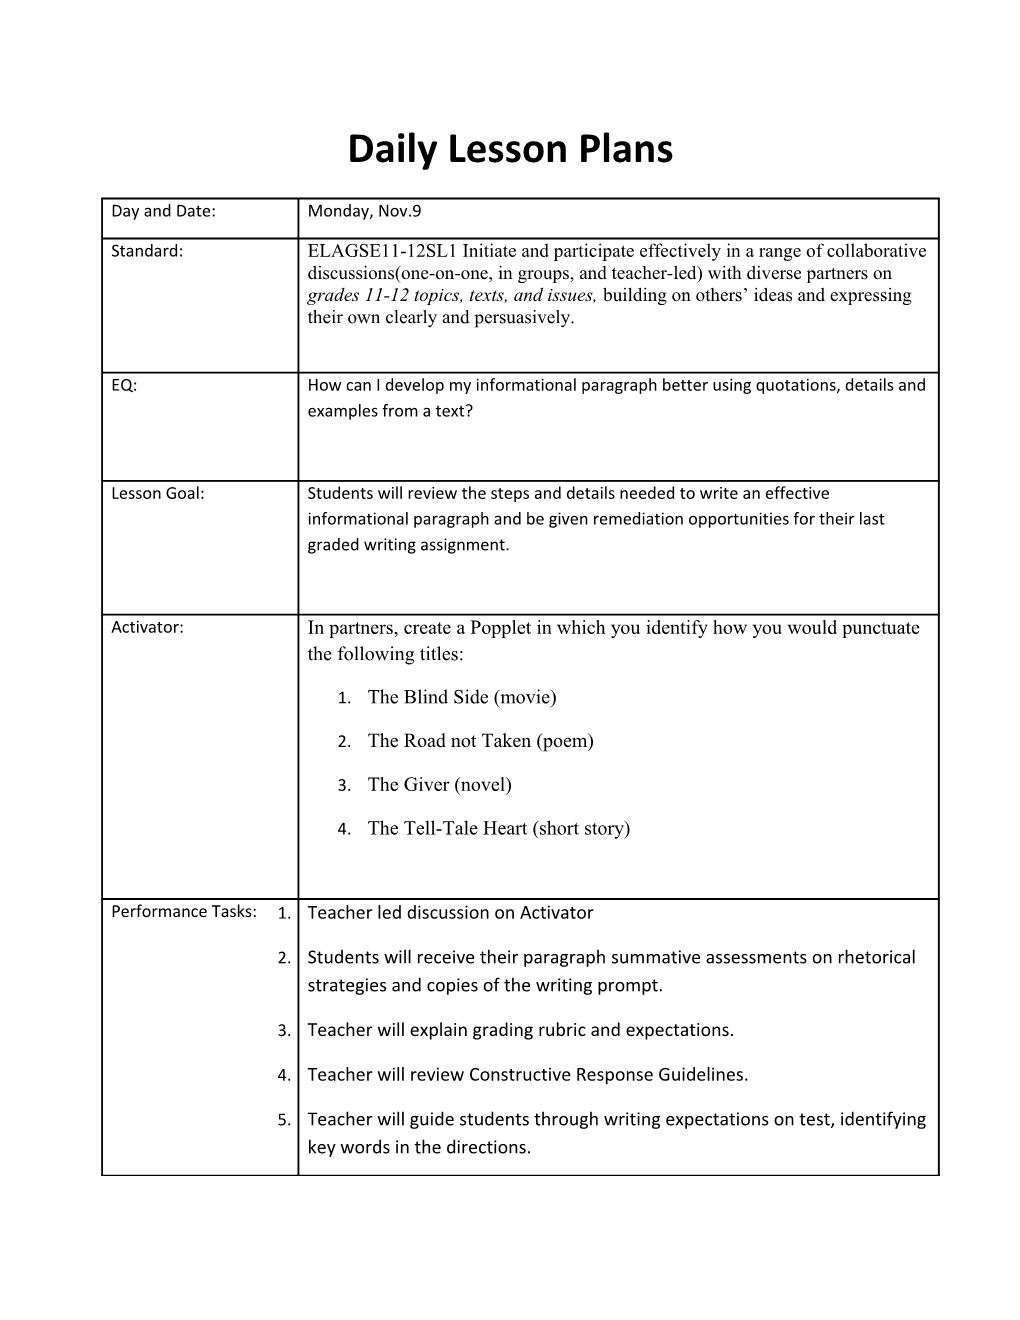 Daily Lesson Plans s4